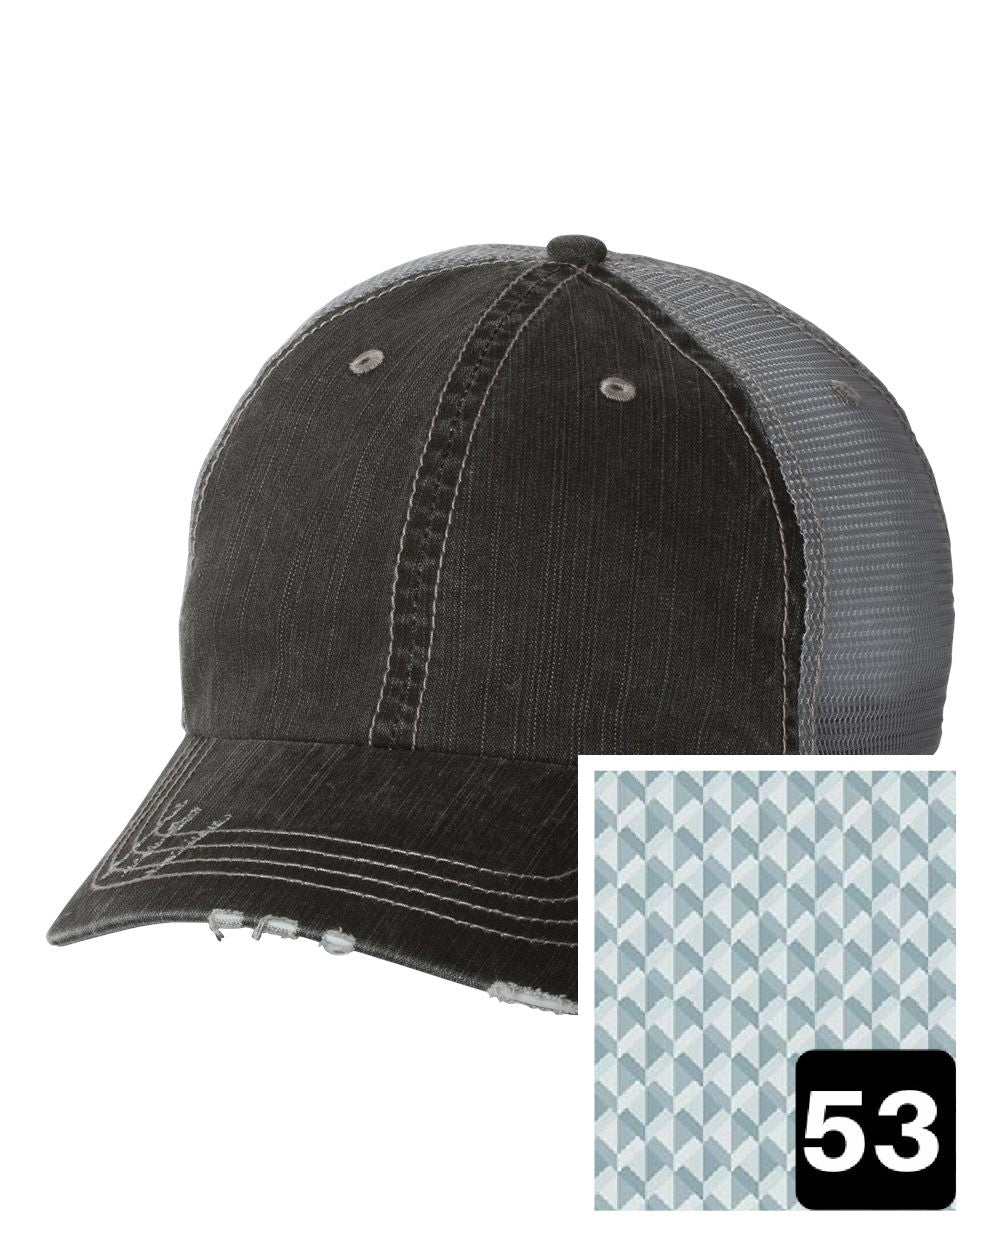 gray distressed trucker hat with multi-color stripe fabric state of Hawaii